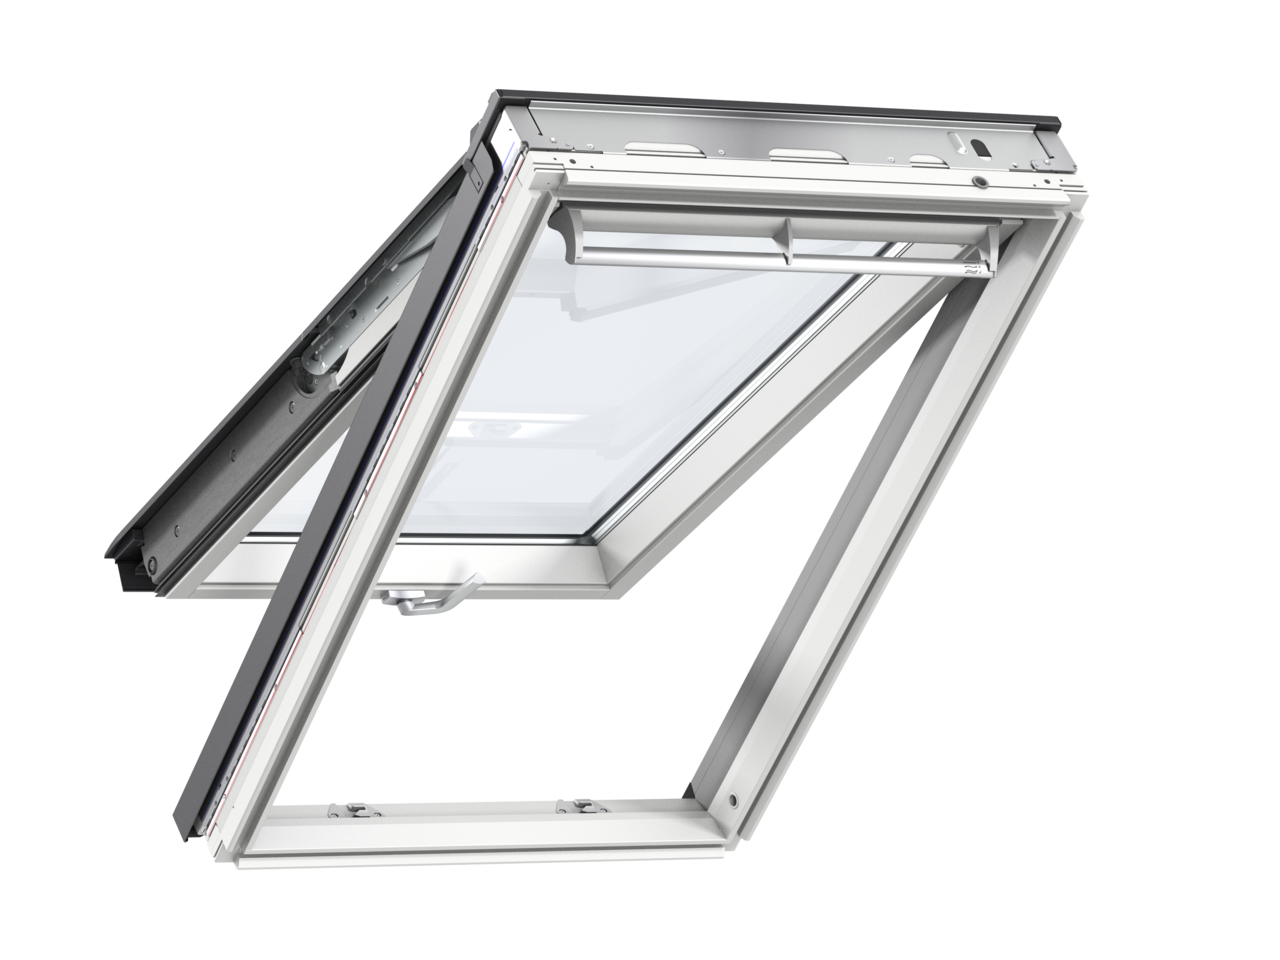 Velux GPL PK08 940 x 1400mm Top Hung 66Pane Roof Window - White Painted